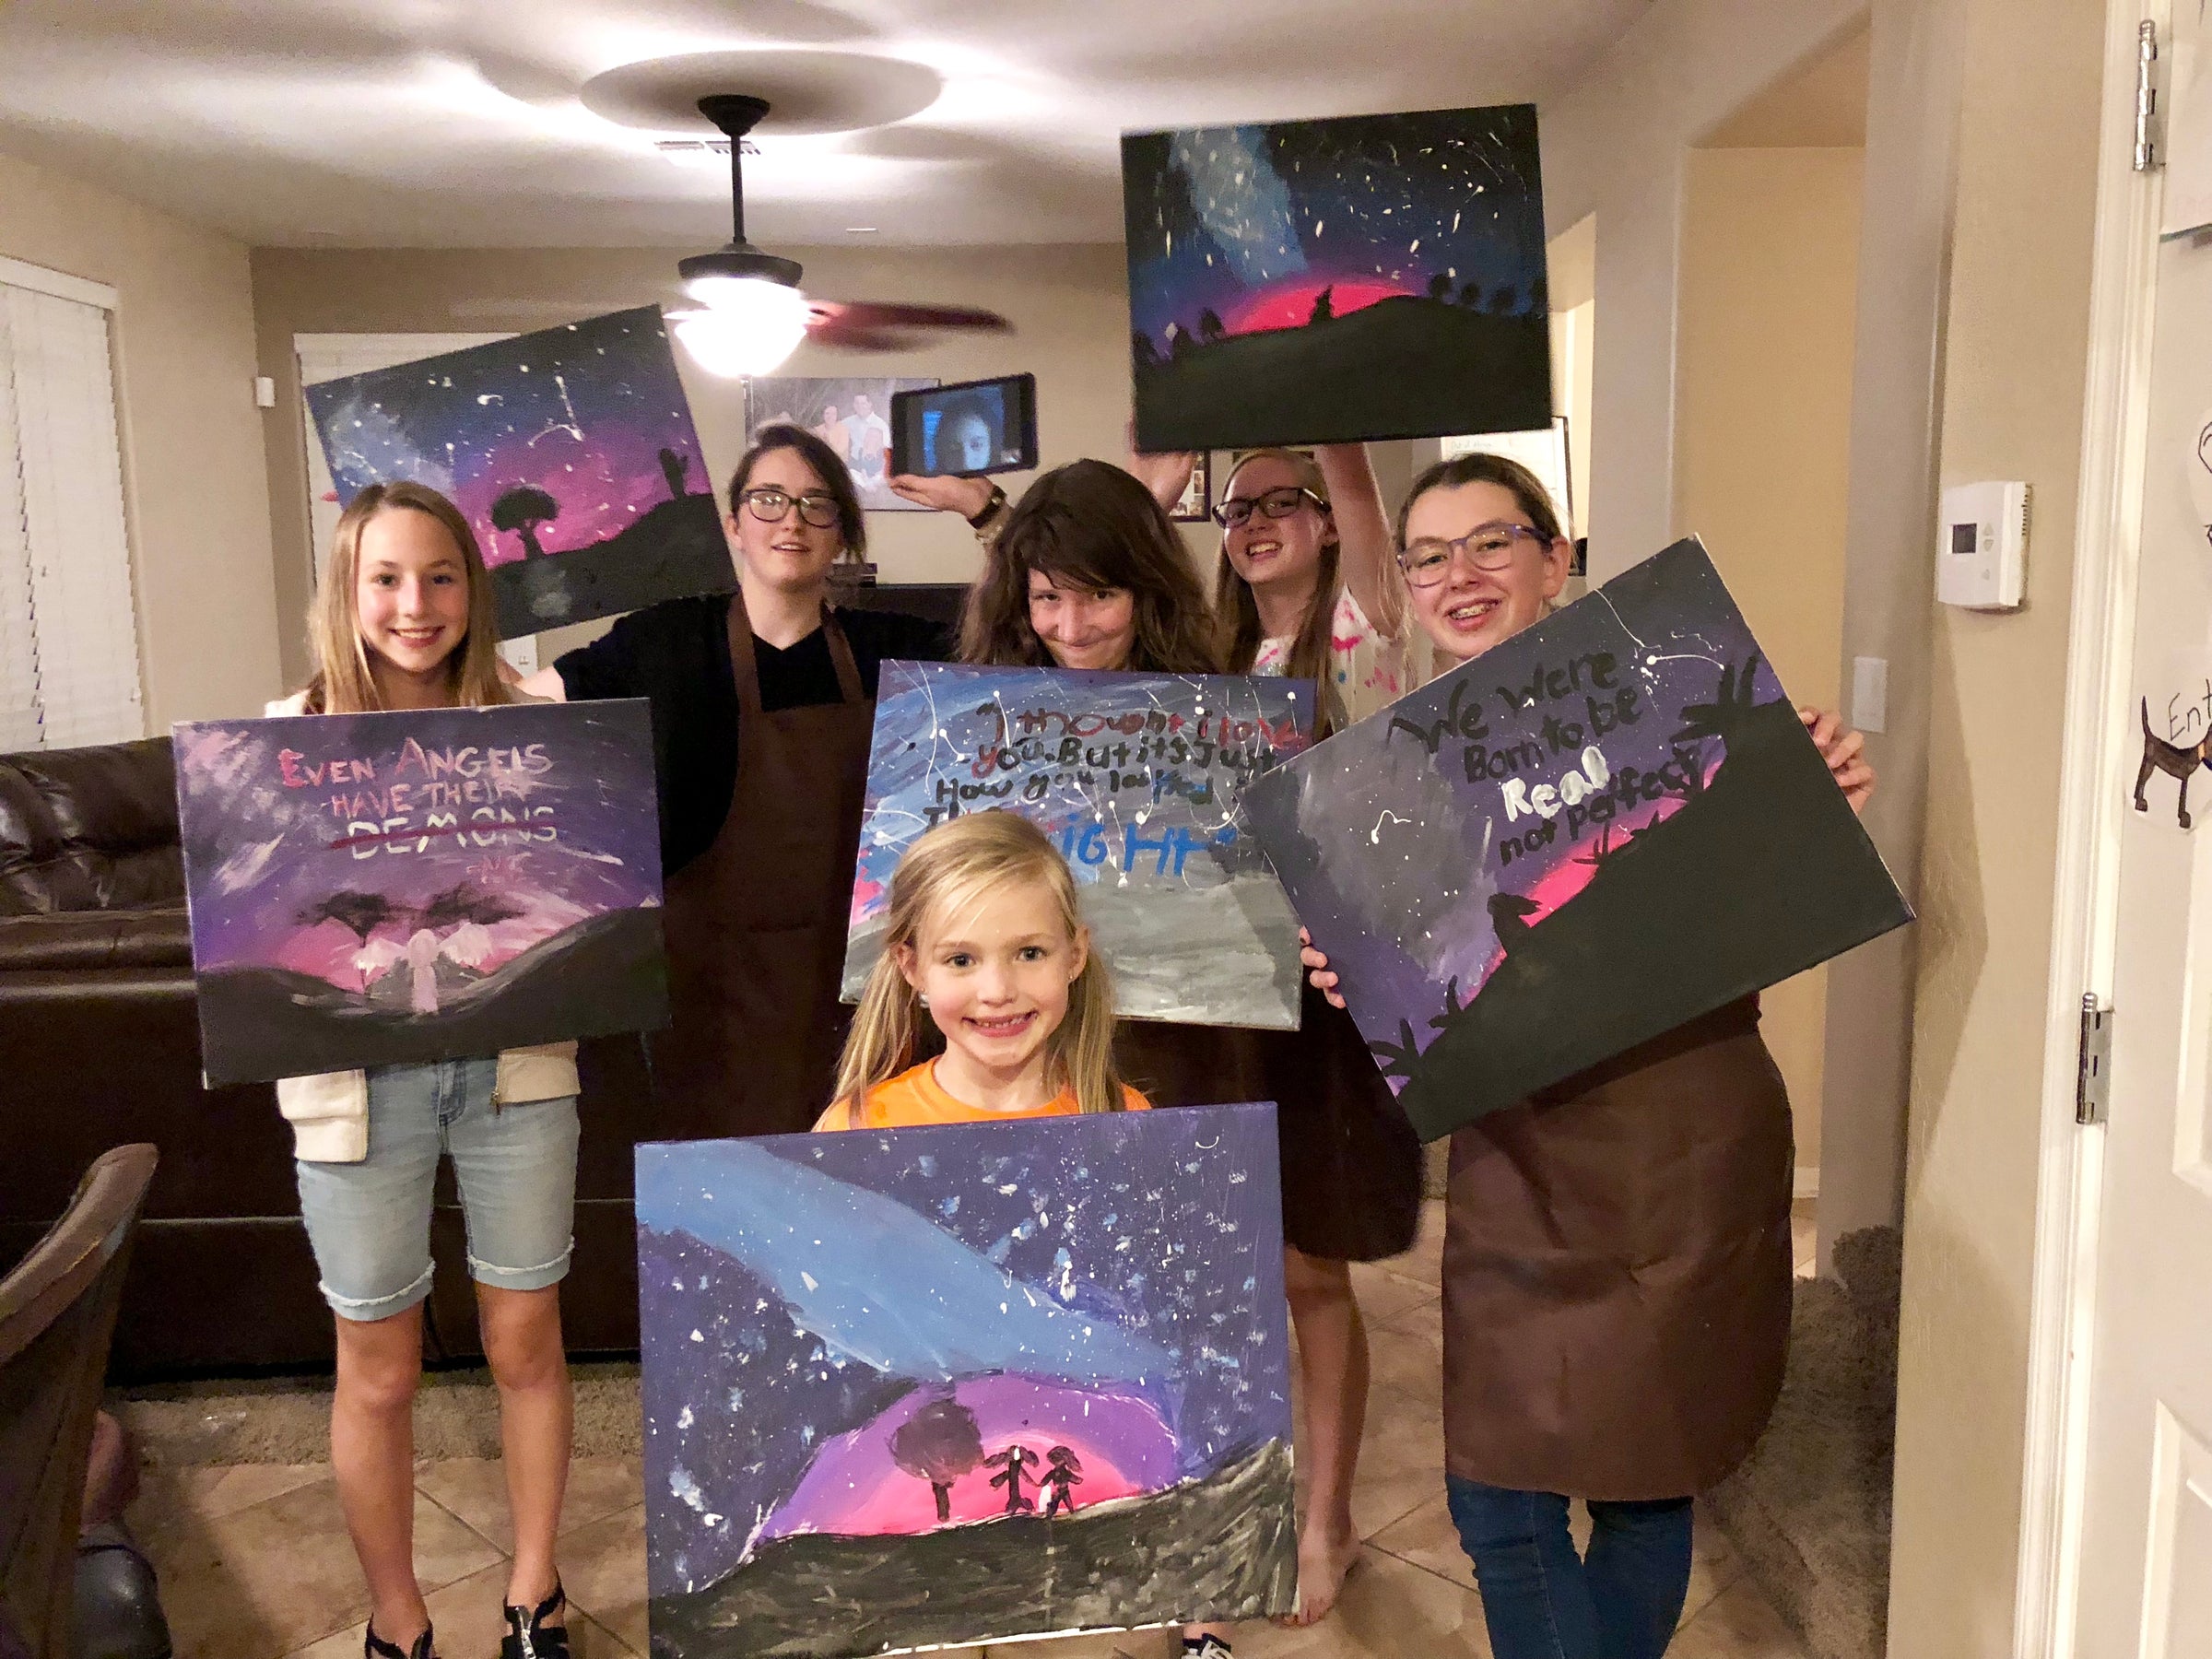 Paint Party Fun In-A-Box - Cactus – ACTS